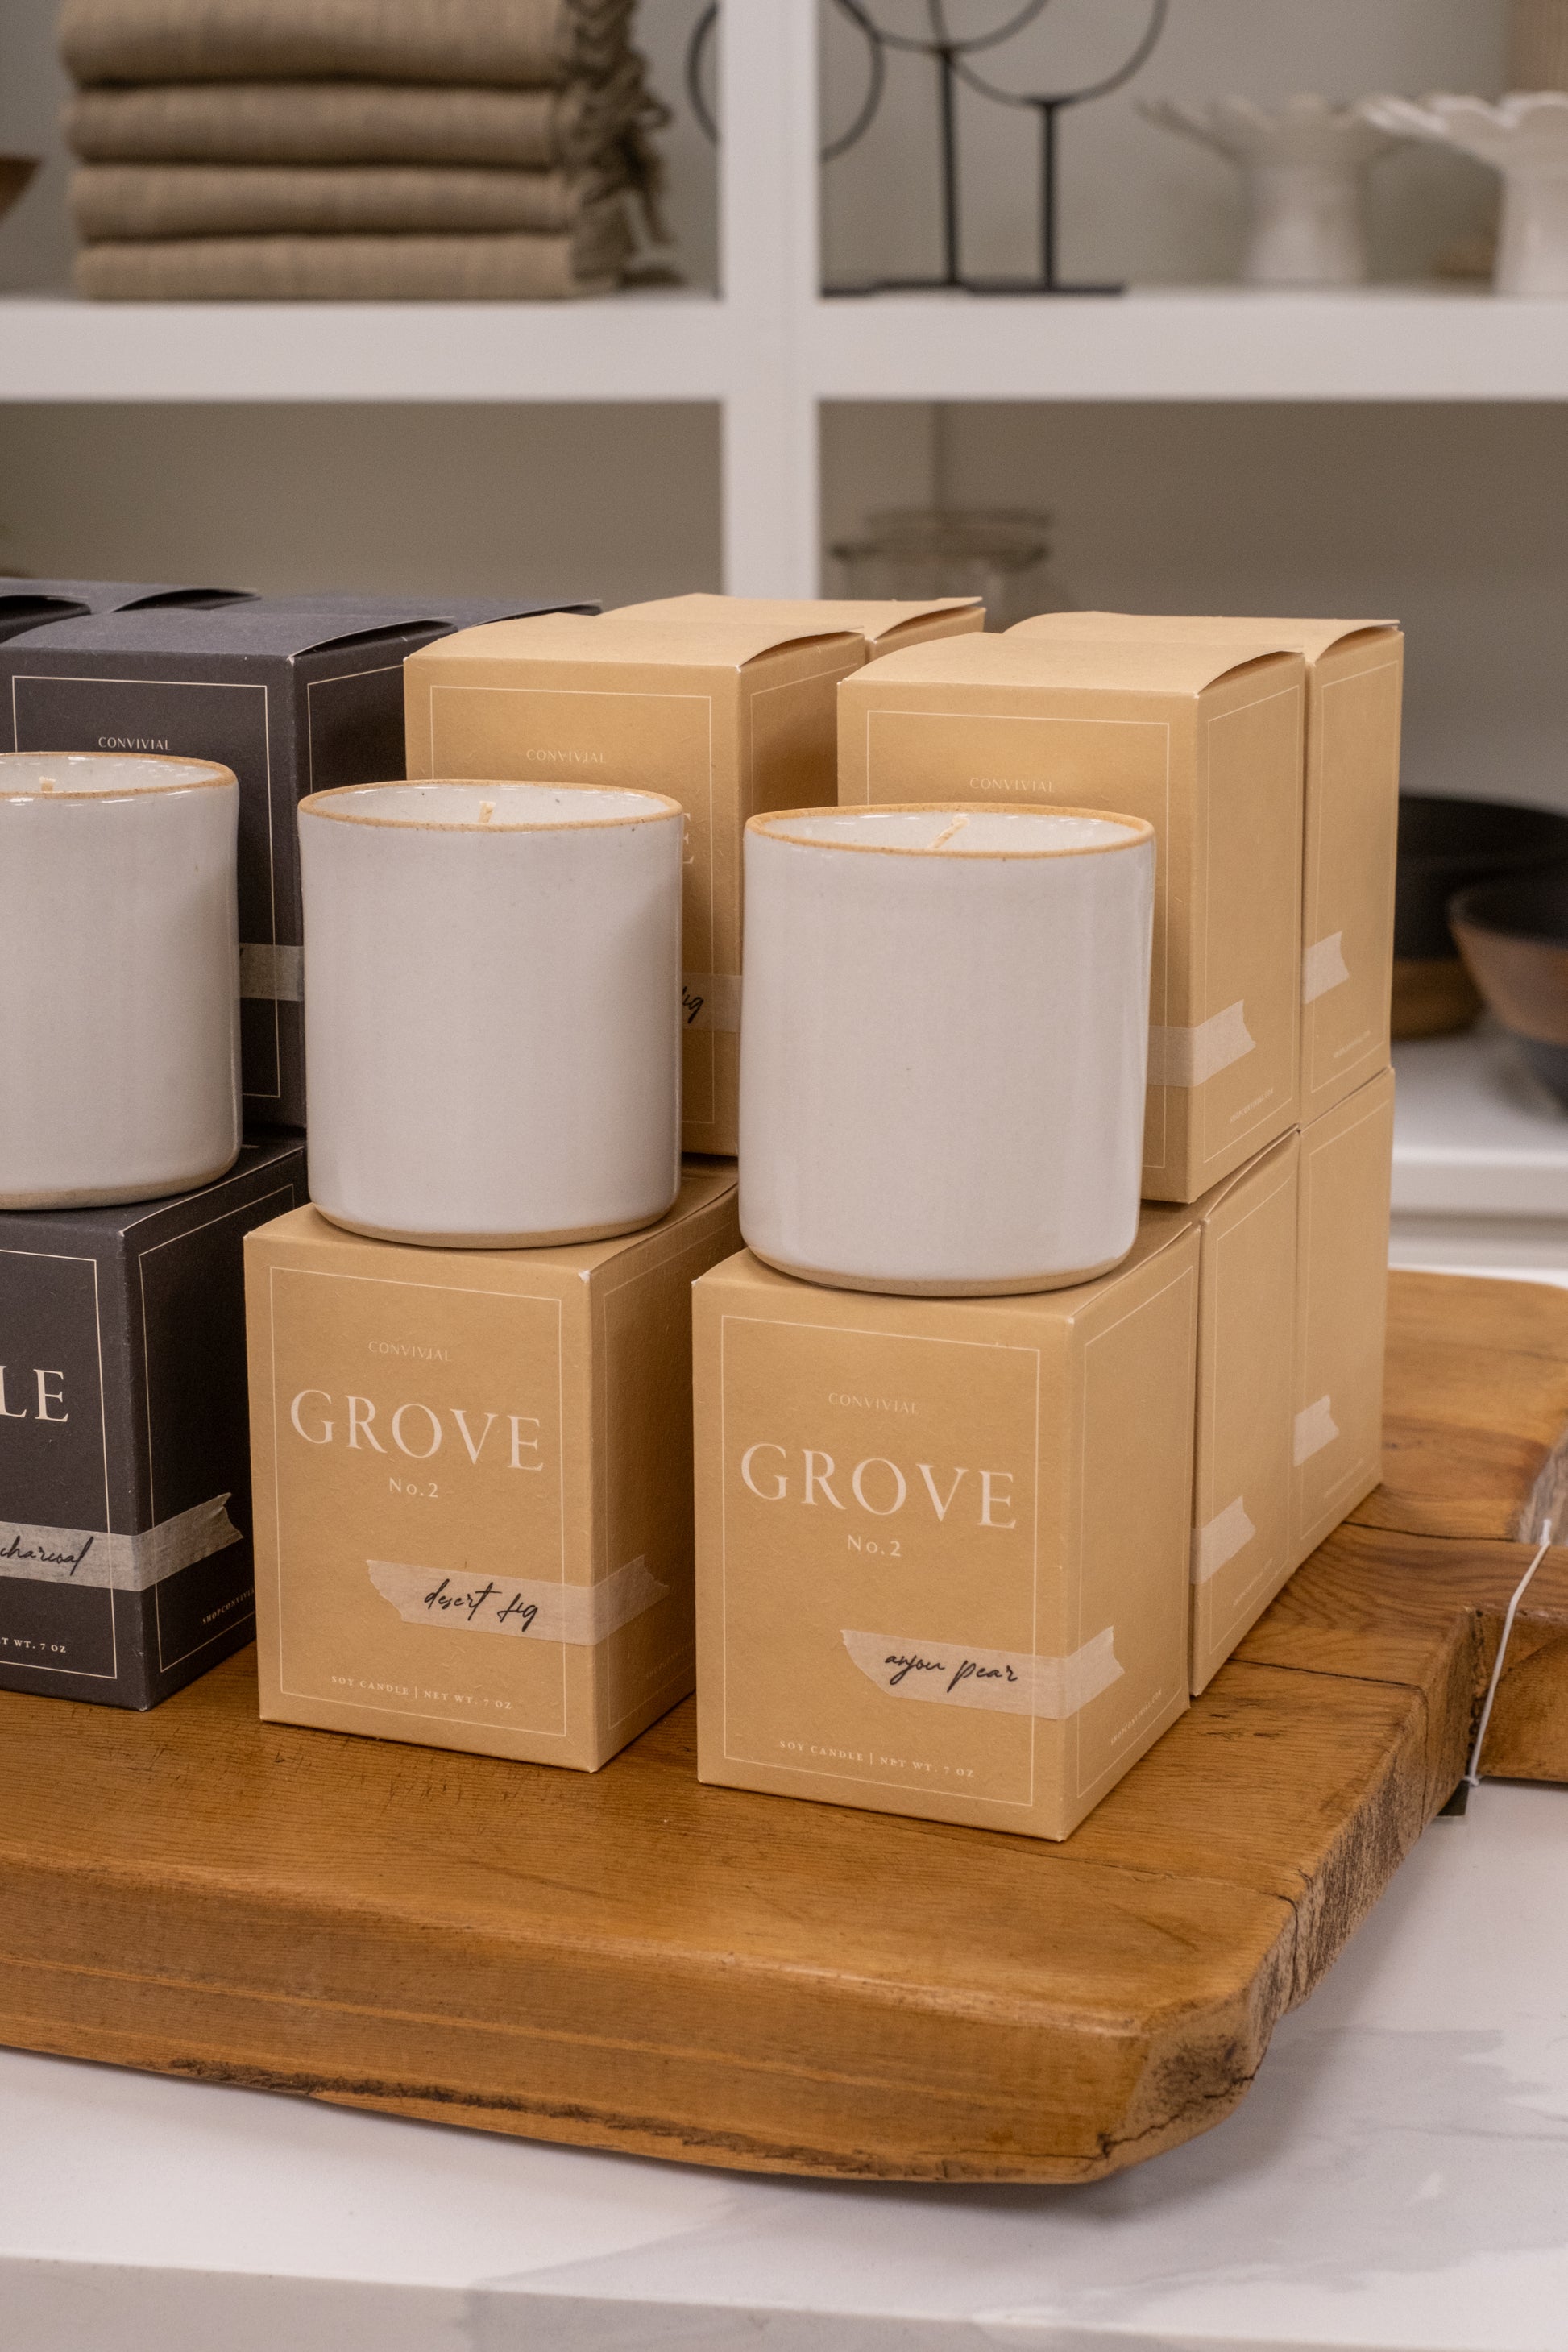 Grove No. 2 Soy Candle Collection Desert Fig and Anjou Pear